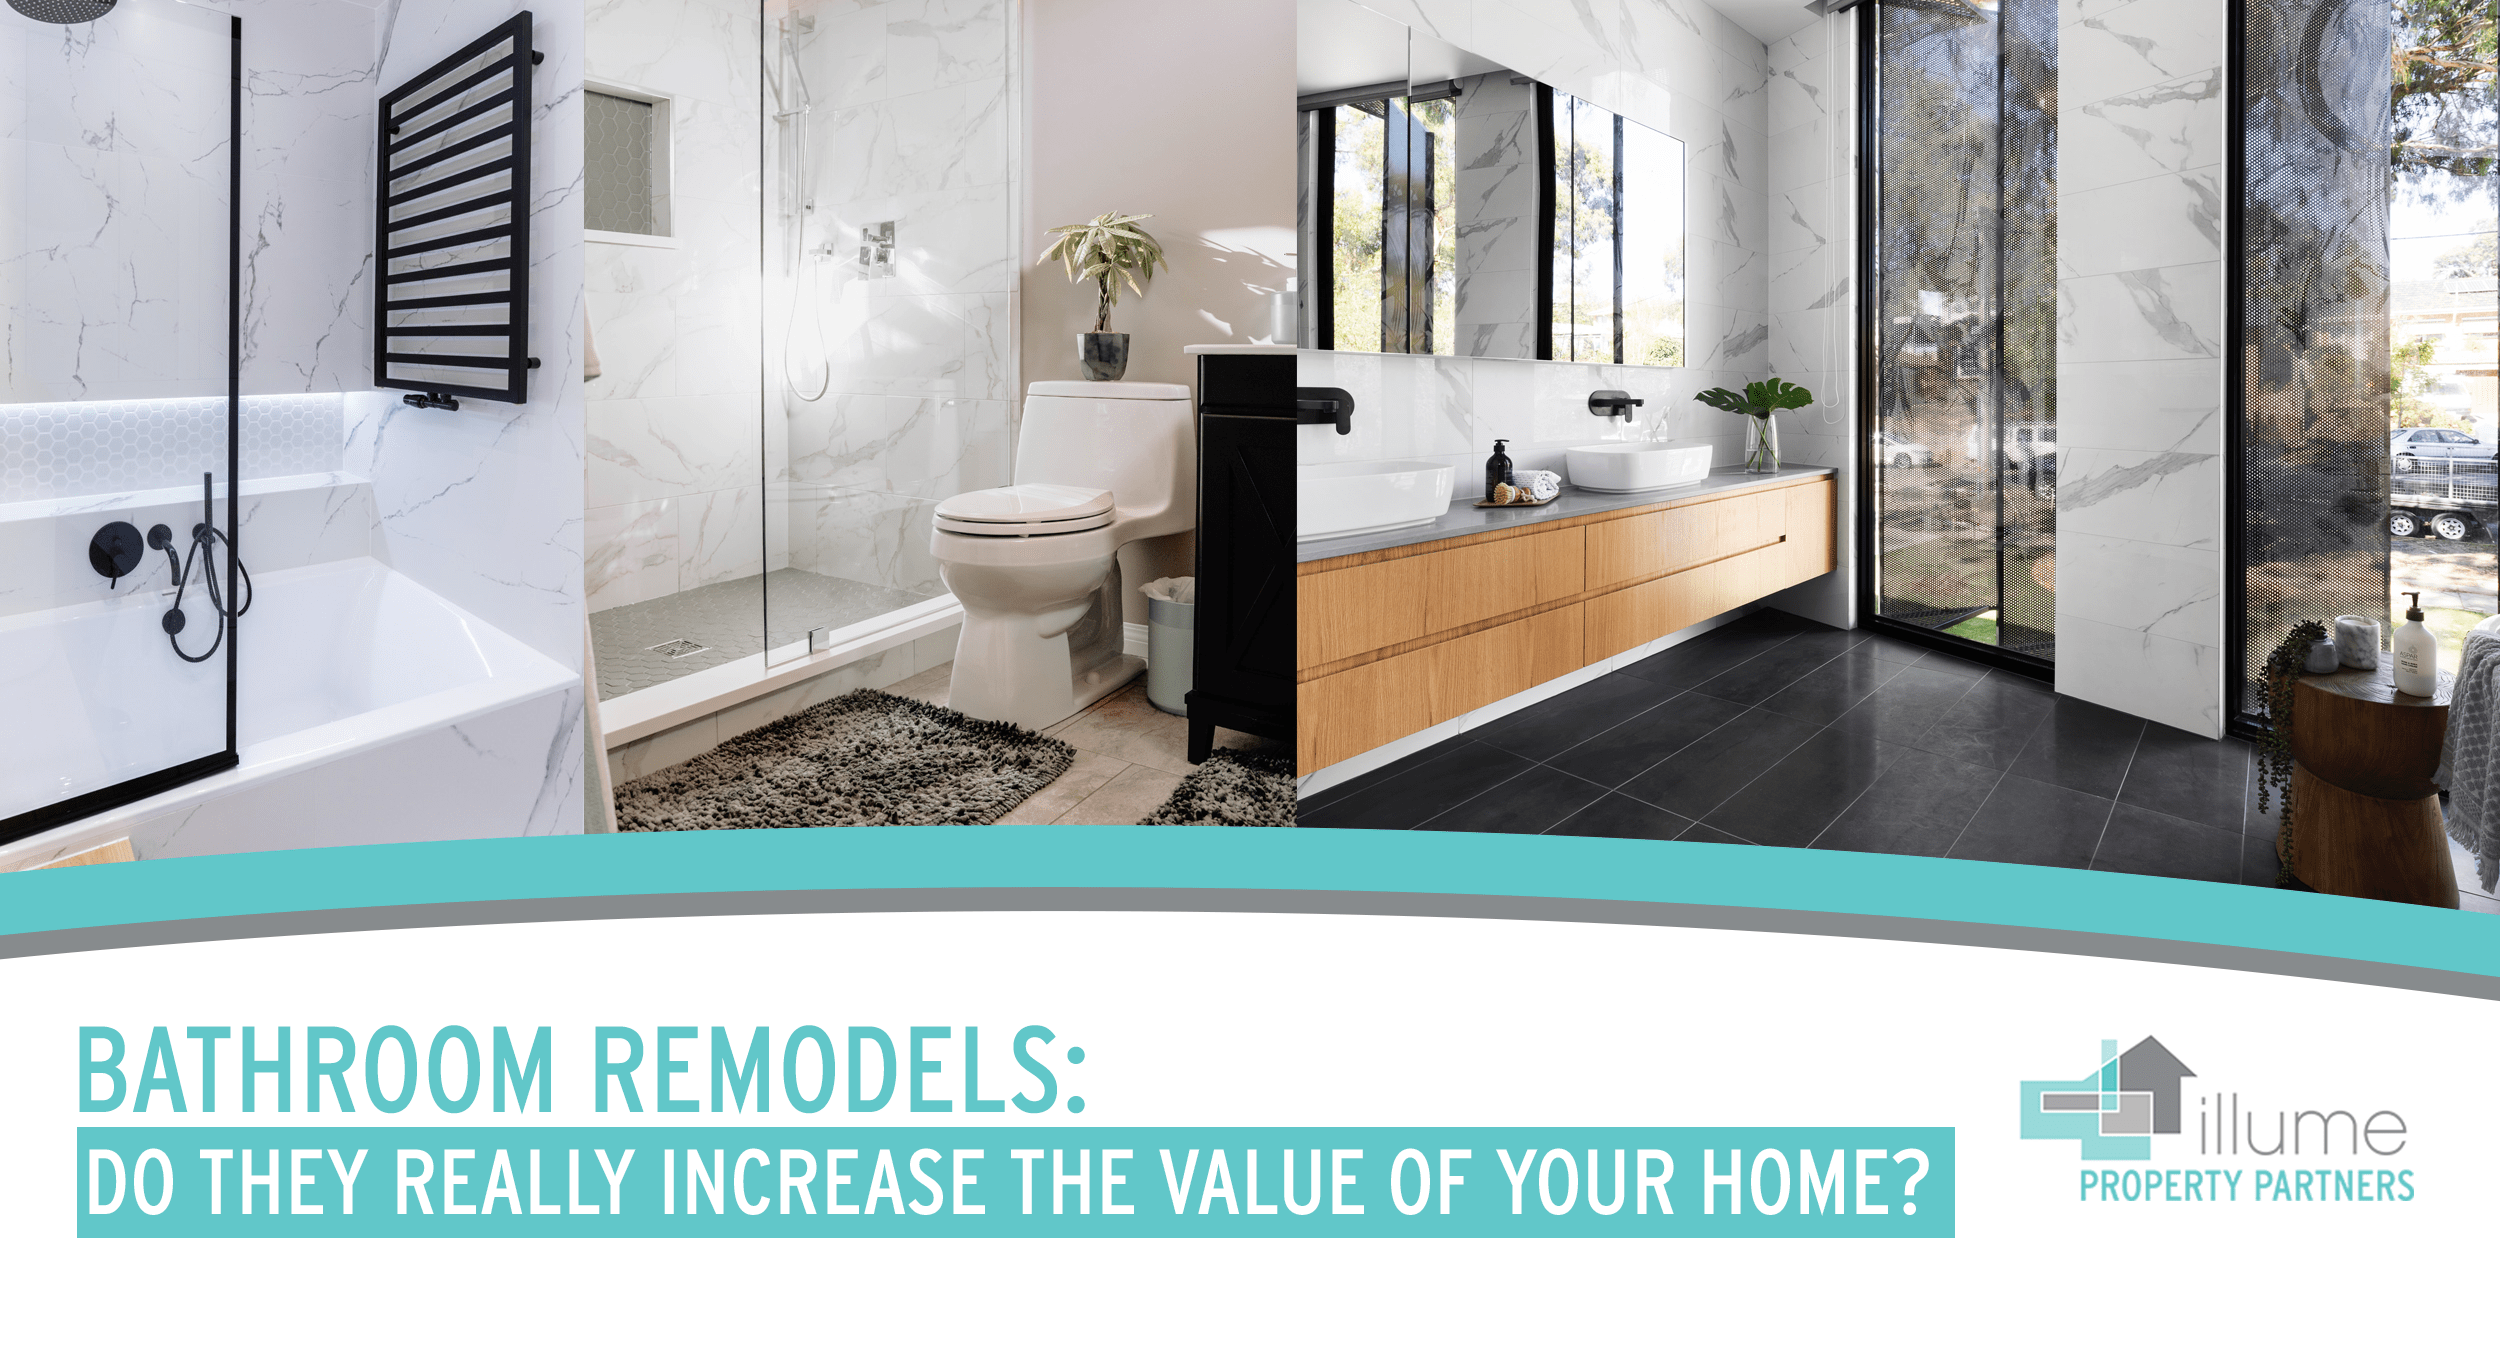 Bathroom Remodels: Do They Really Increase the Value of Your Home?